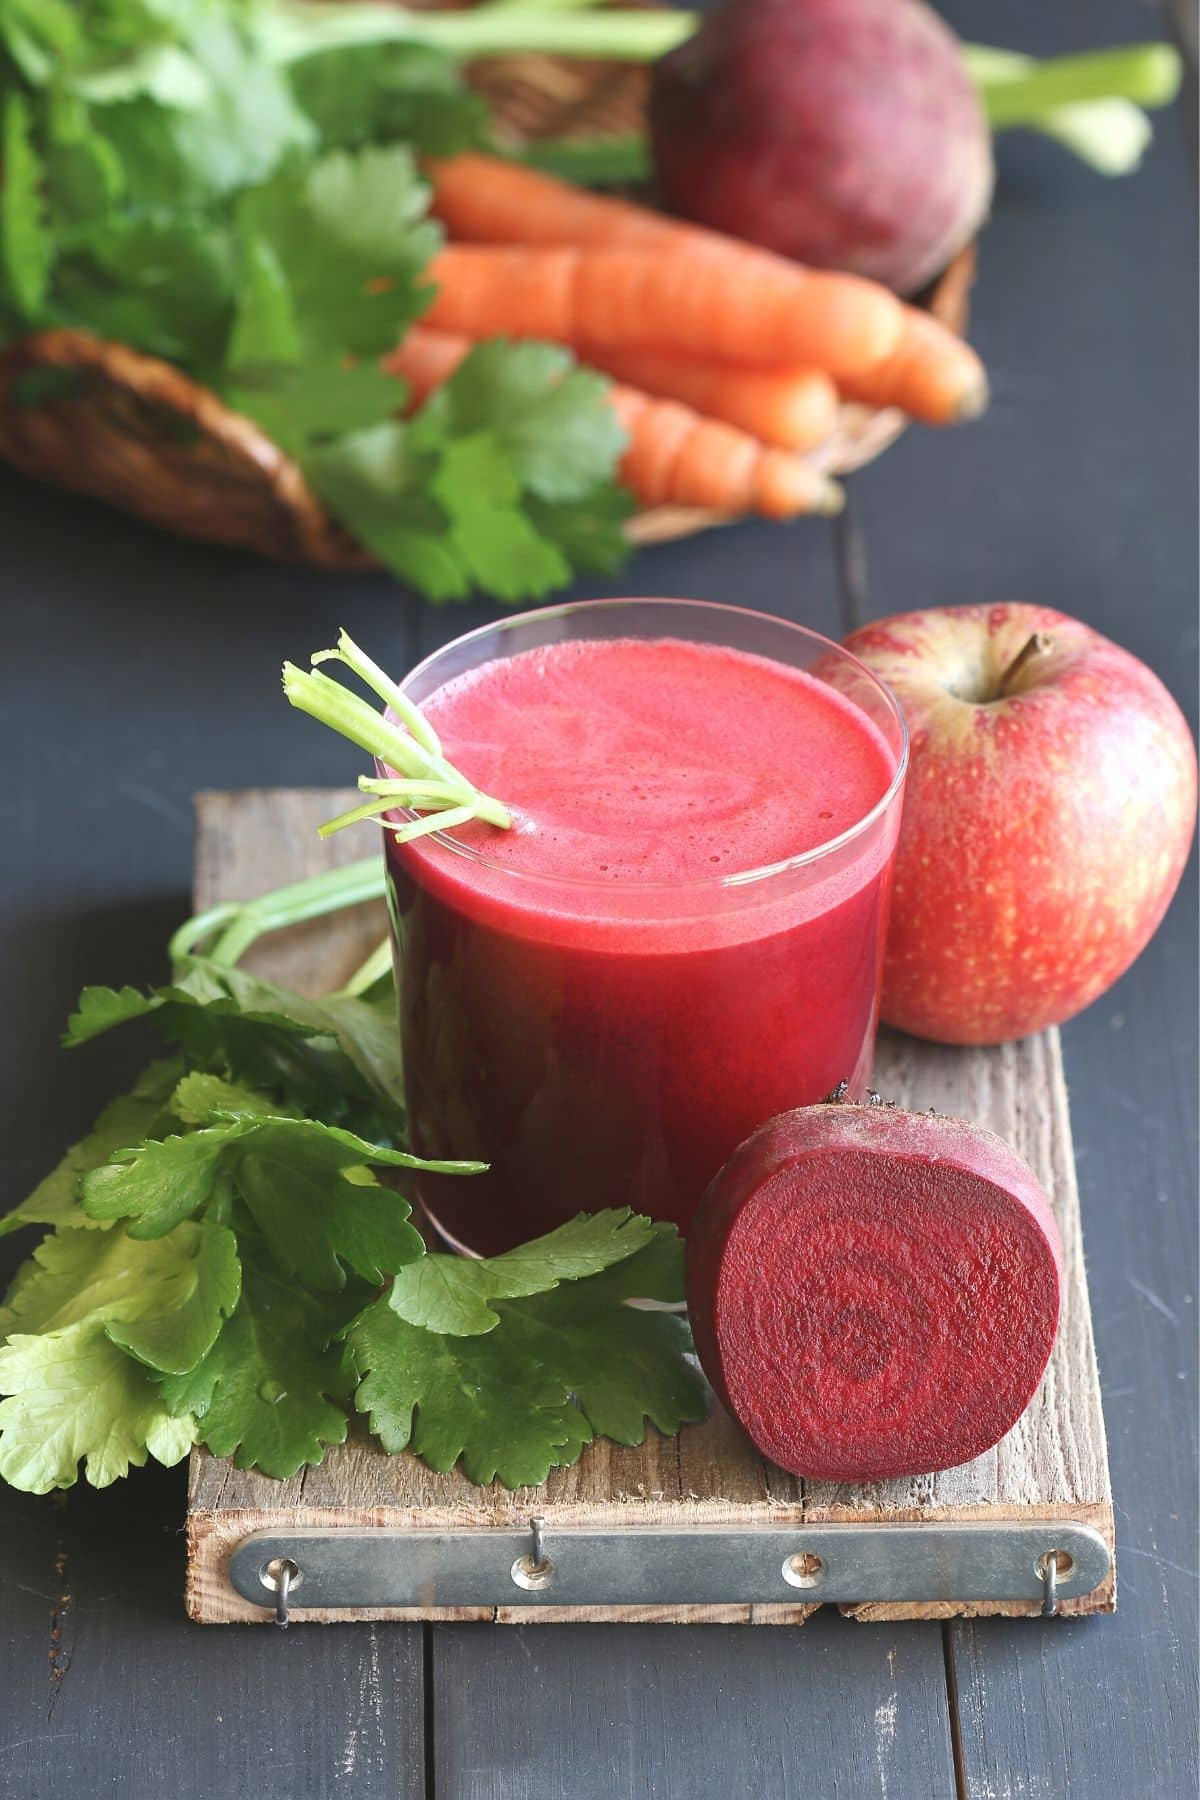 beet juice made with apples and carrots.